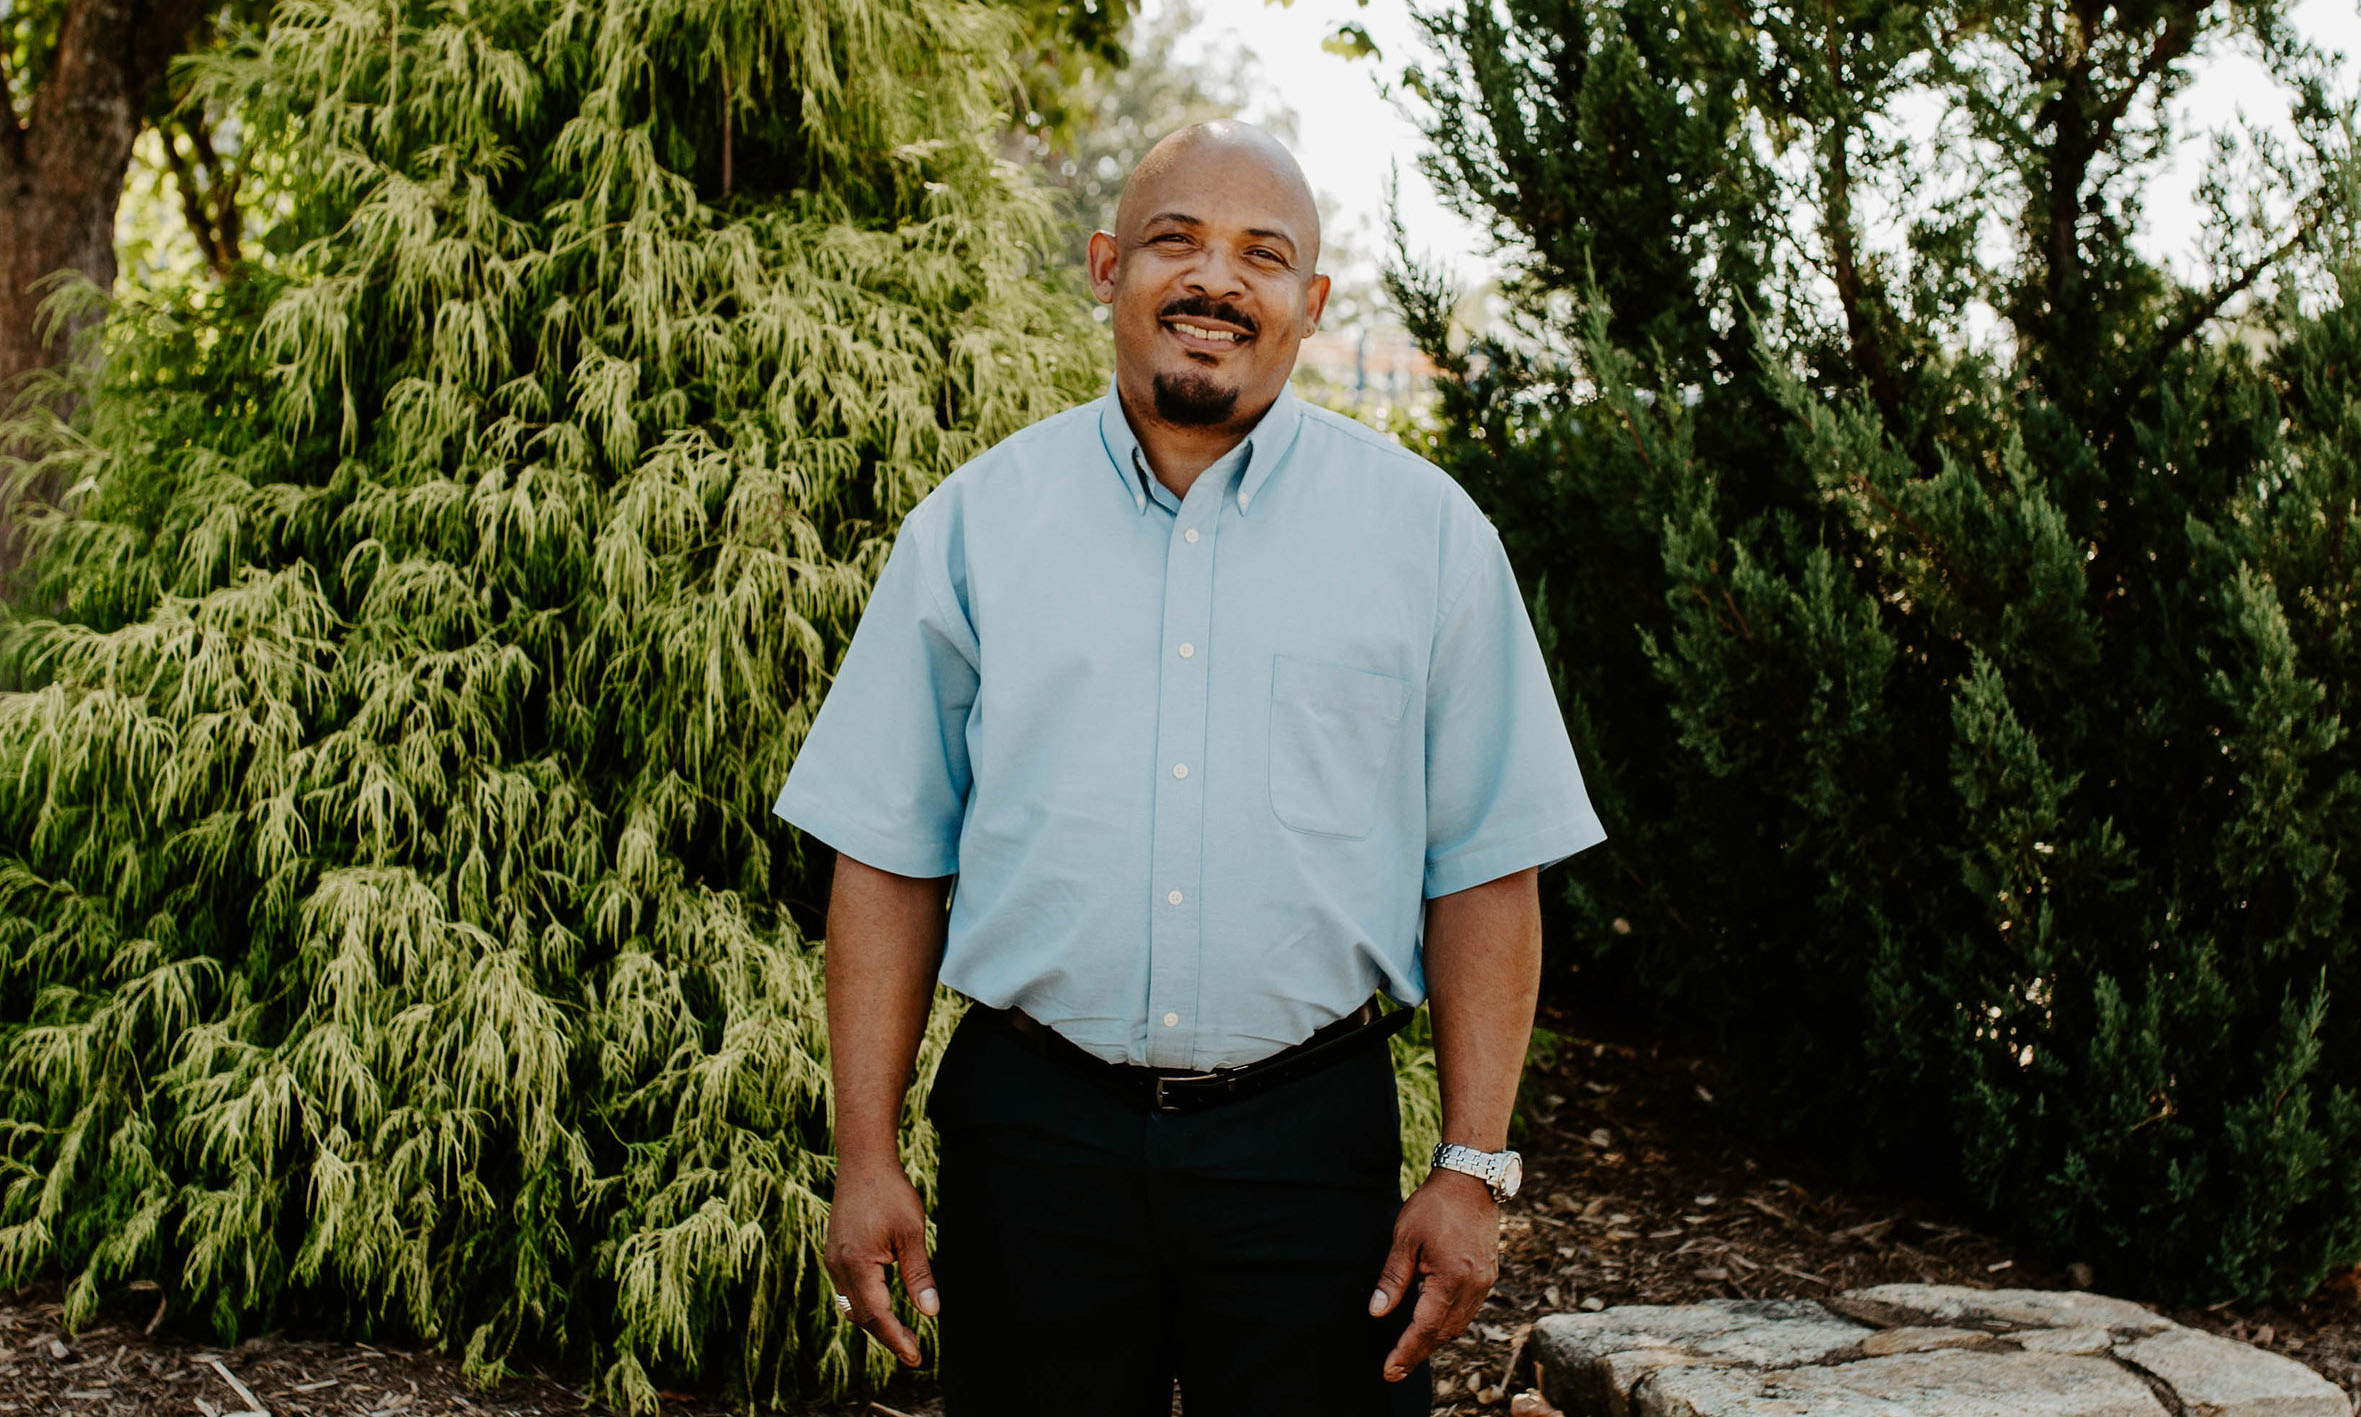 Tony Thomas, a Spartanburg County resident, is the Northside Community Engagement Coordinator. Photo by Morgan Yelton